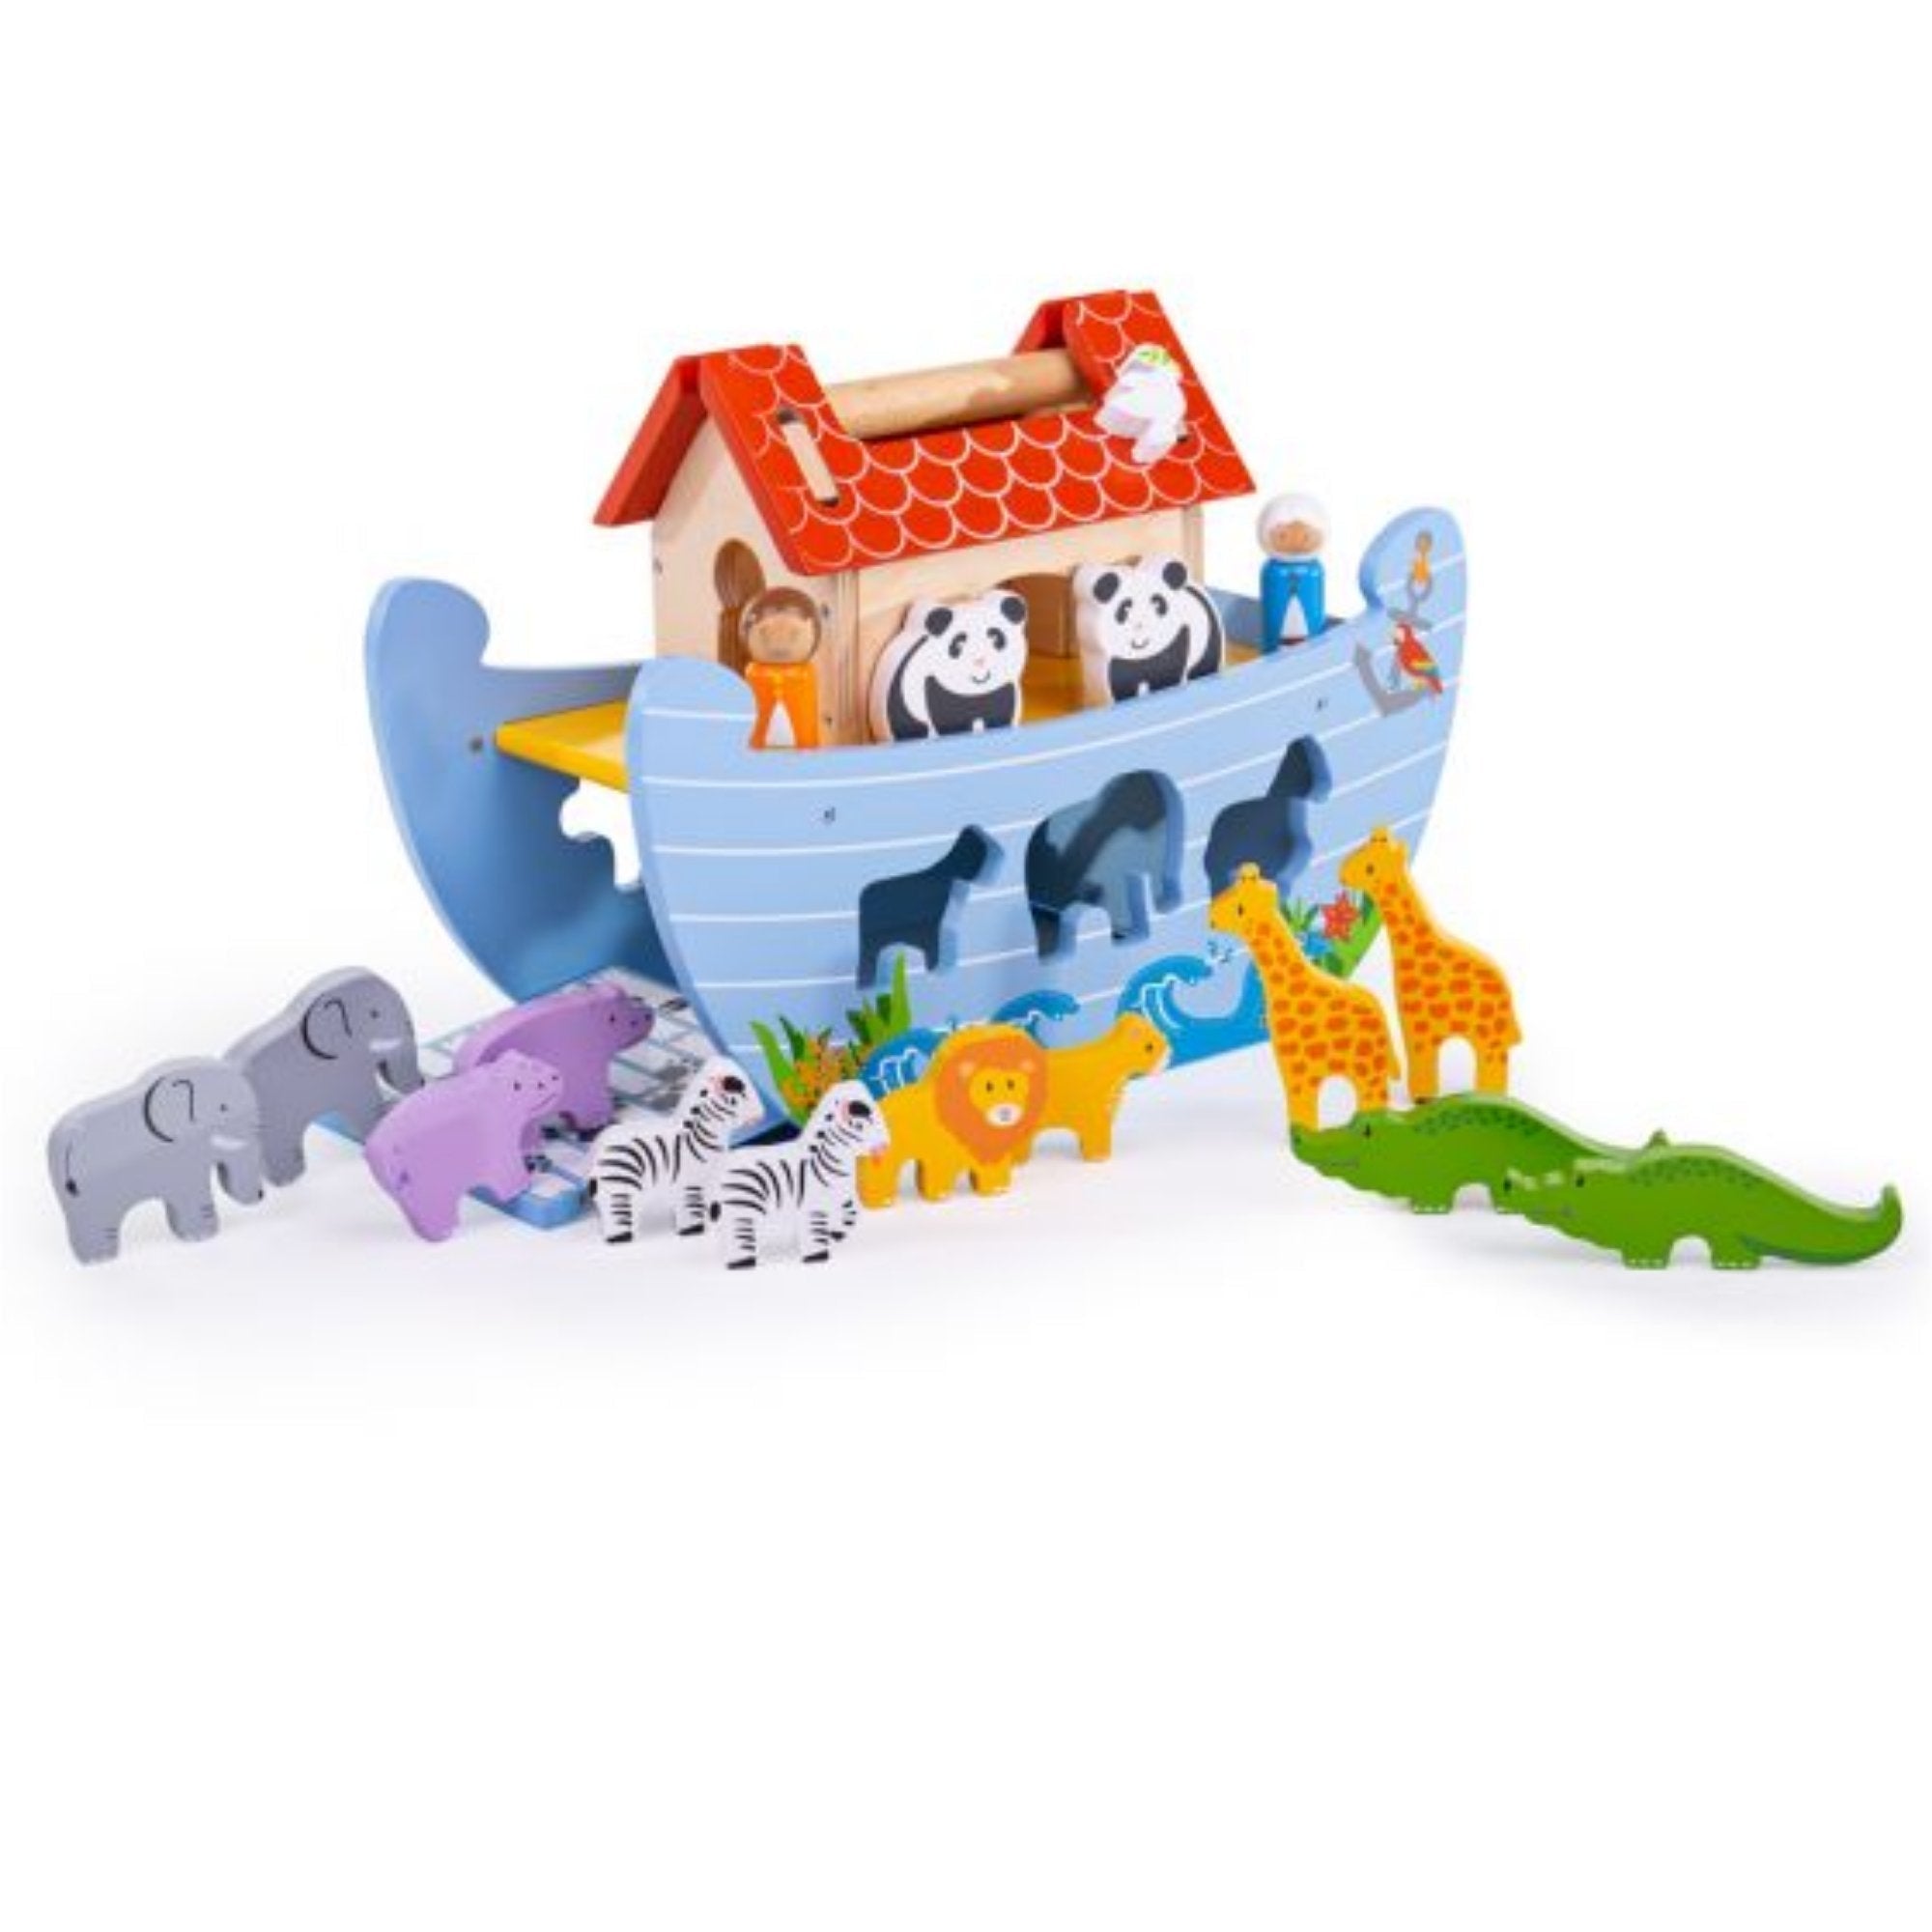 BigJigs Noahs Ark, Noah and his wife welcome animals of all shapes and sizes aboard their brightly coloured wooden Noah's Ark. It's almost time to set sail, but first there's plenty of fun to be had with this wooden Noah's Ark toy. Some of the happy tribe of animals have magnets on their backs so that they can be attached to the side of the ark, while some can be slotted through the holes in the side! There's even a floating dolphin and a fold-down ramp so that the animals can enter two by two! A sturdy car